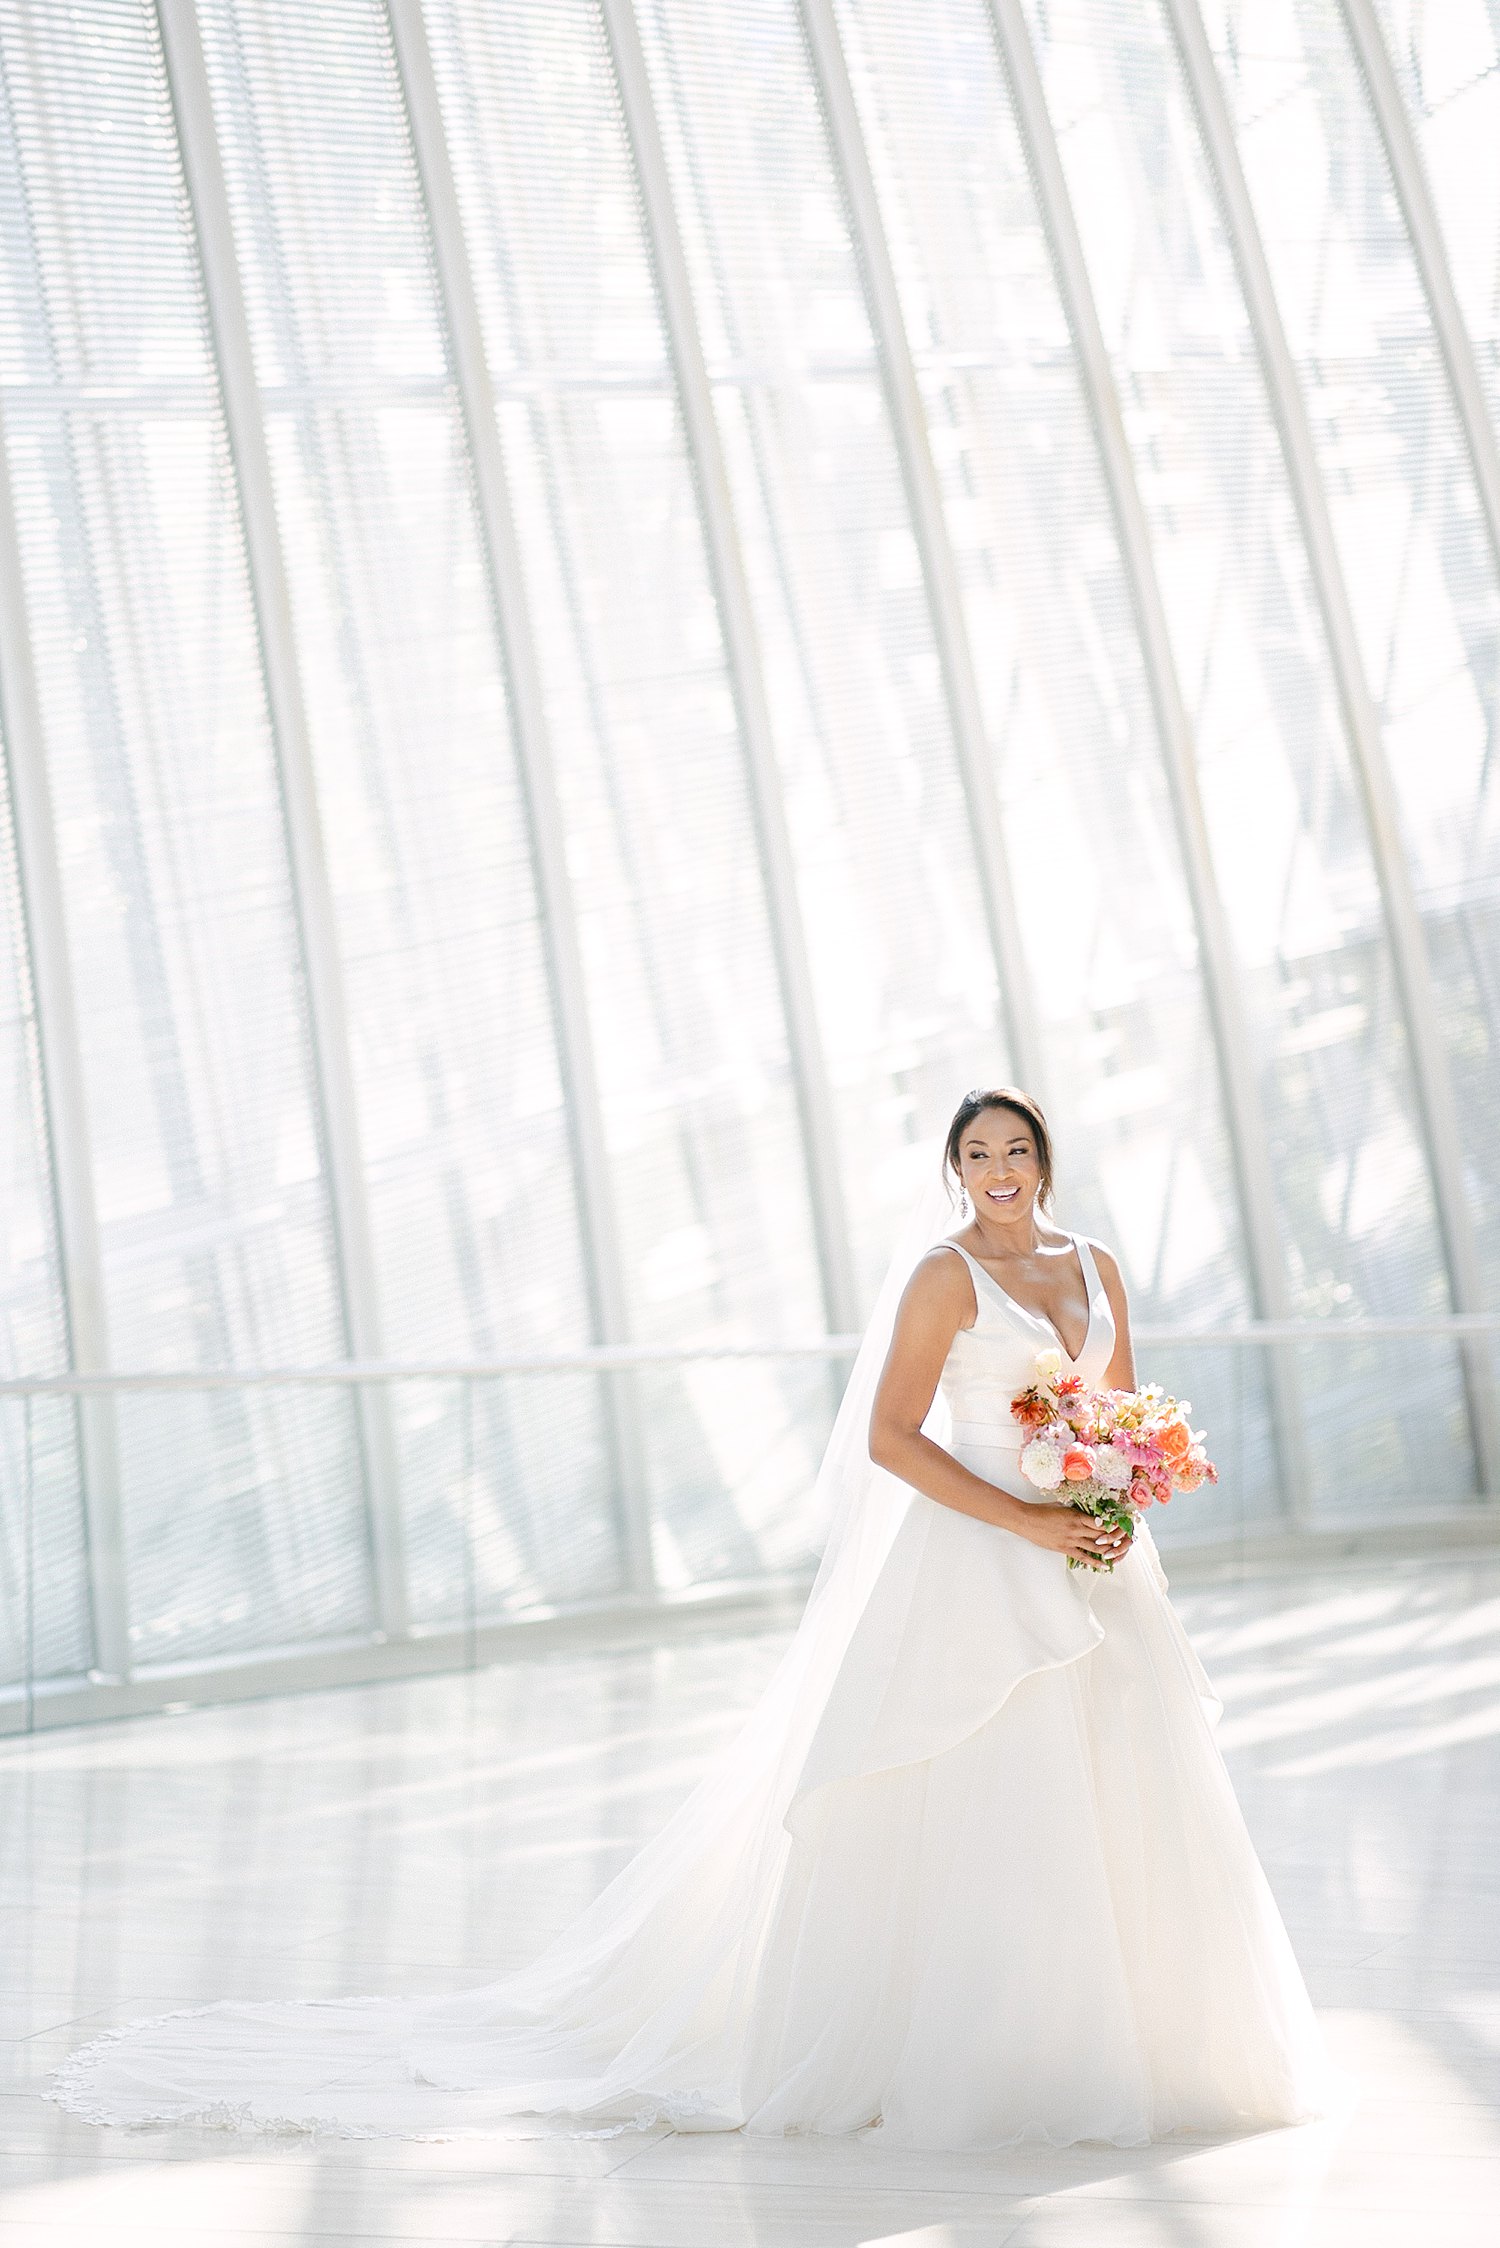 Bride in white wedding dress holding colorful floral bouquet smiling Dallas Arts District